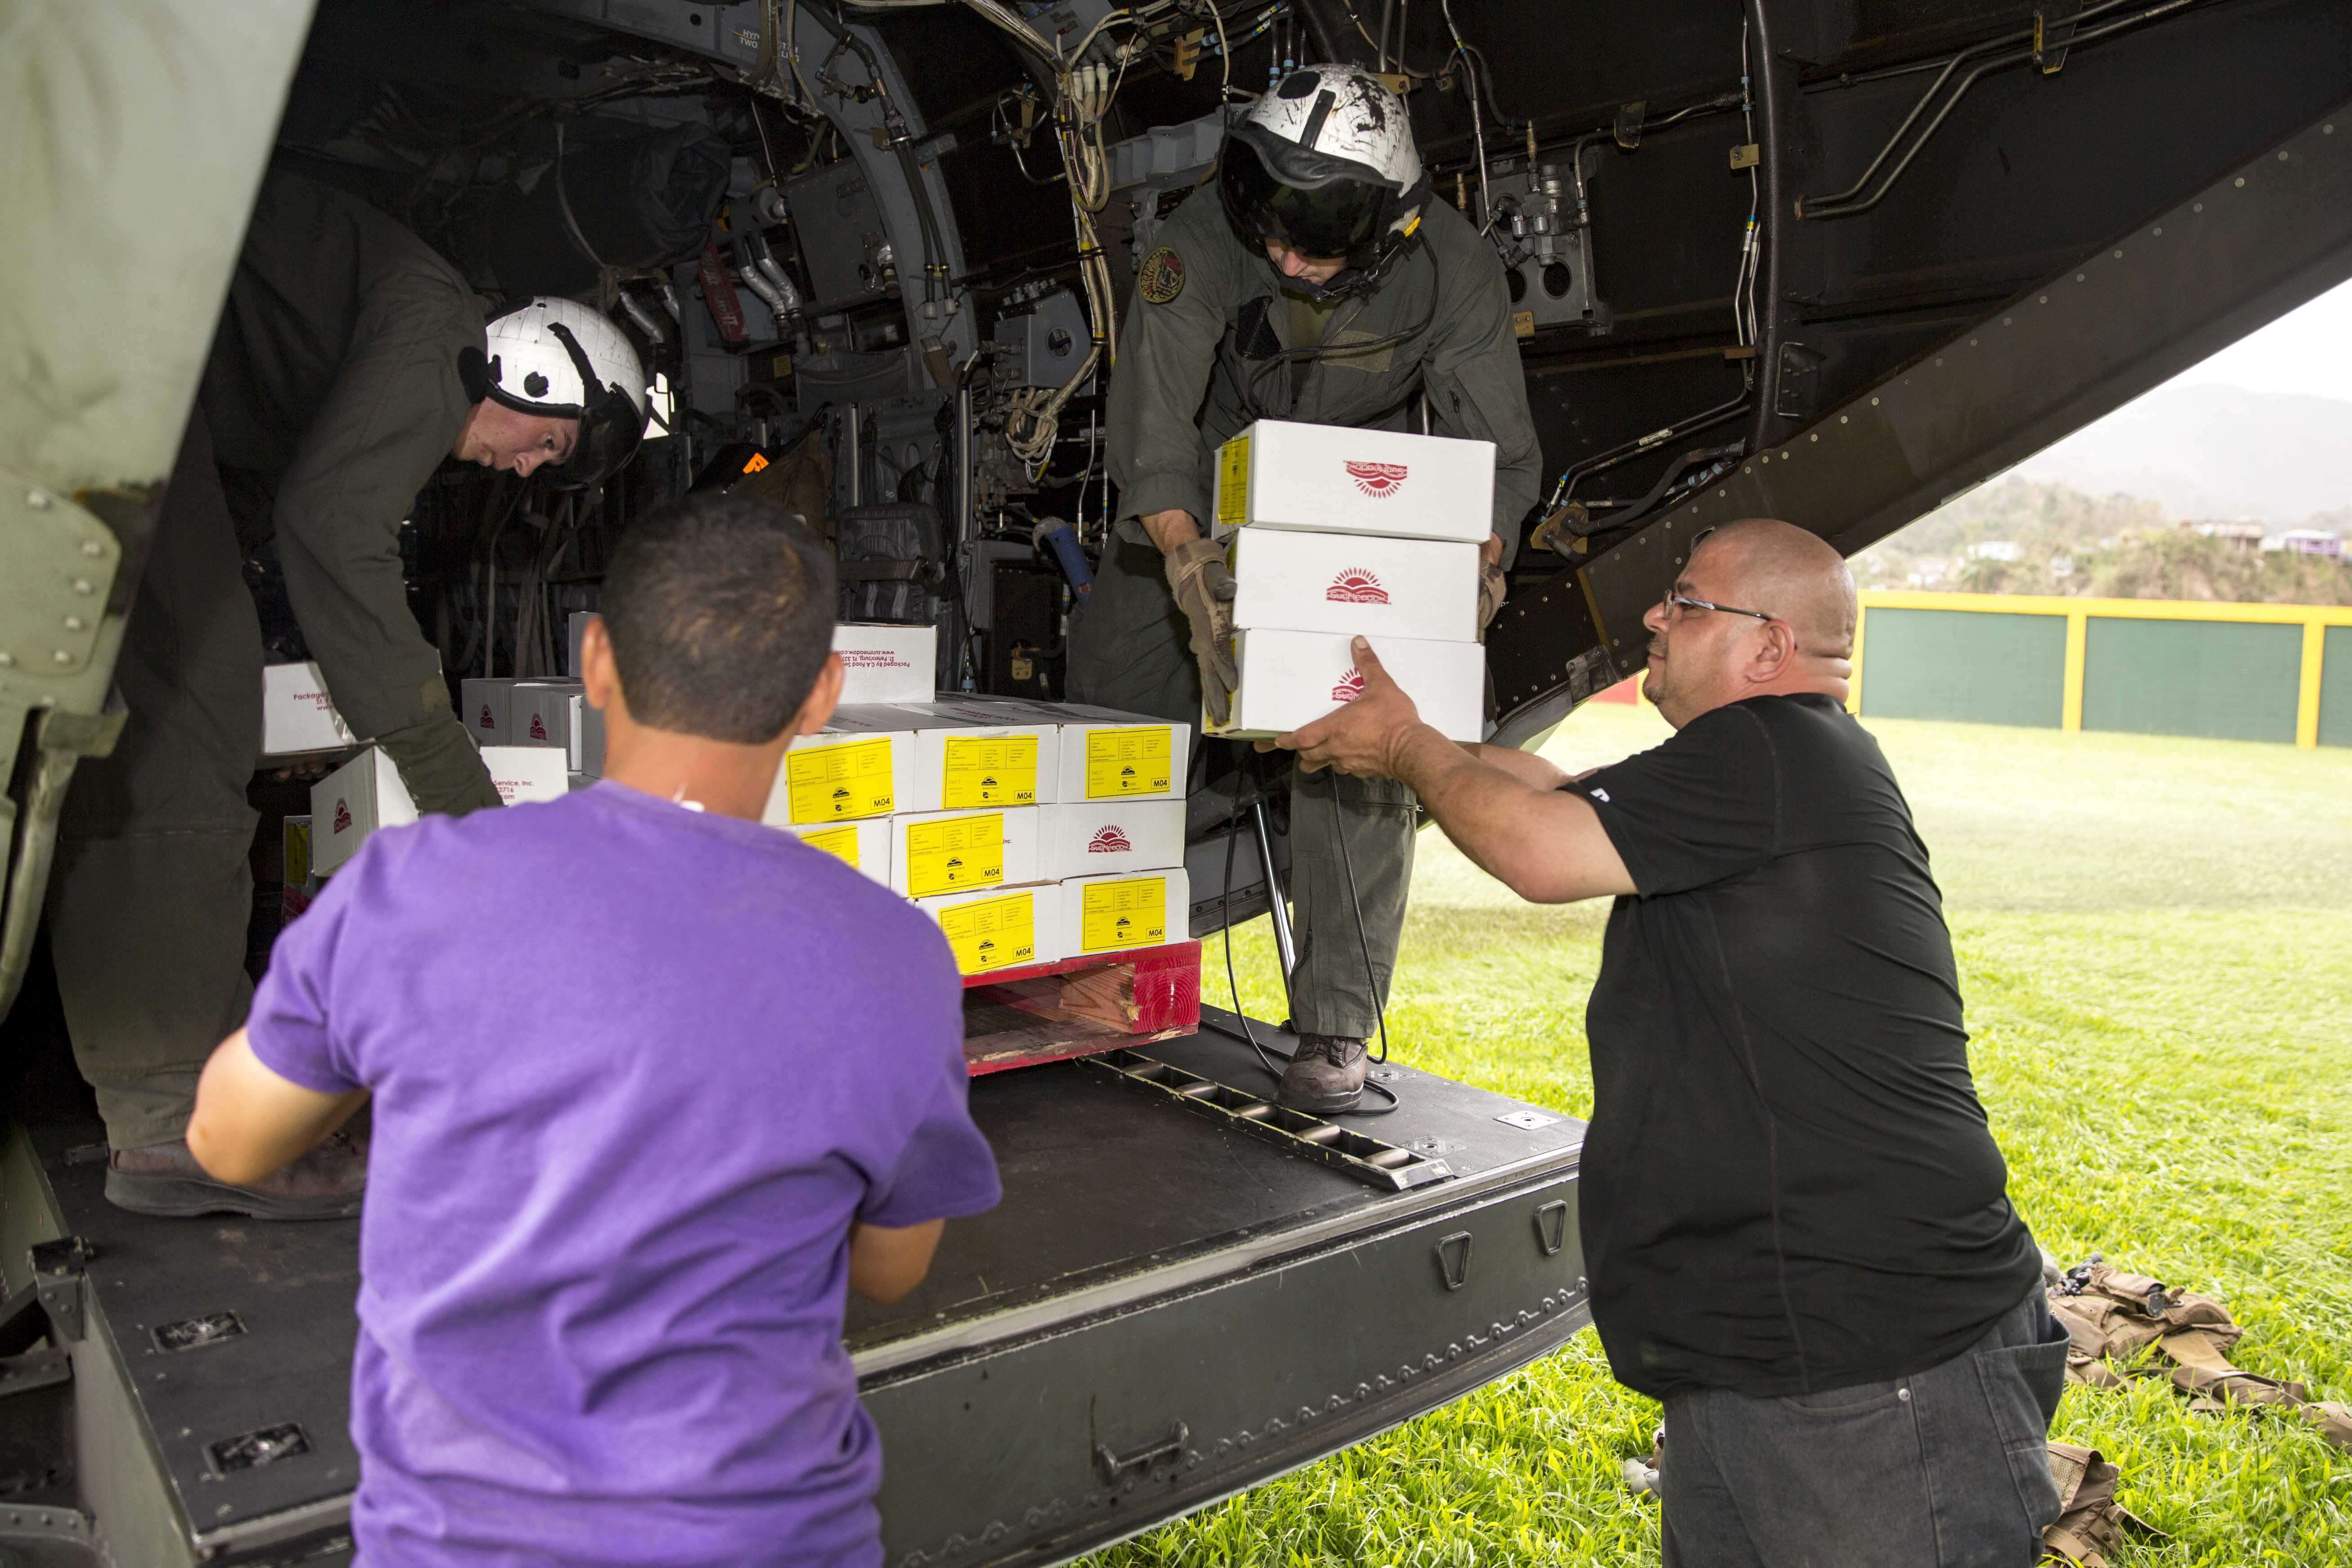 170927-N-KW492-251 JAYUYA, Puerto Rico (Sept. 27, 2017) Marines assigned to Marine Medium Tiltrotor Squadron (VMM) 162, embarked aboard the amphibious assault ship USS Kearsarge (LHD-3), and local volunteers unload food from an MV-22 Osprey in Jayuya, Puerto Rico for Hurricane Maria relief. (U.S. Navy photo )